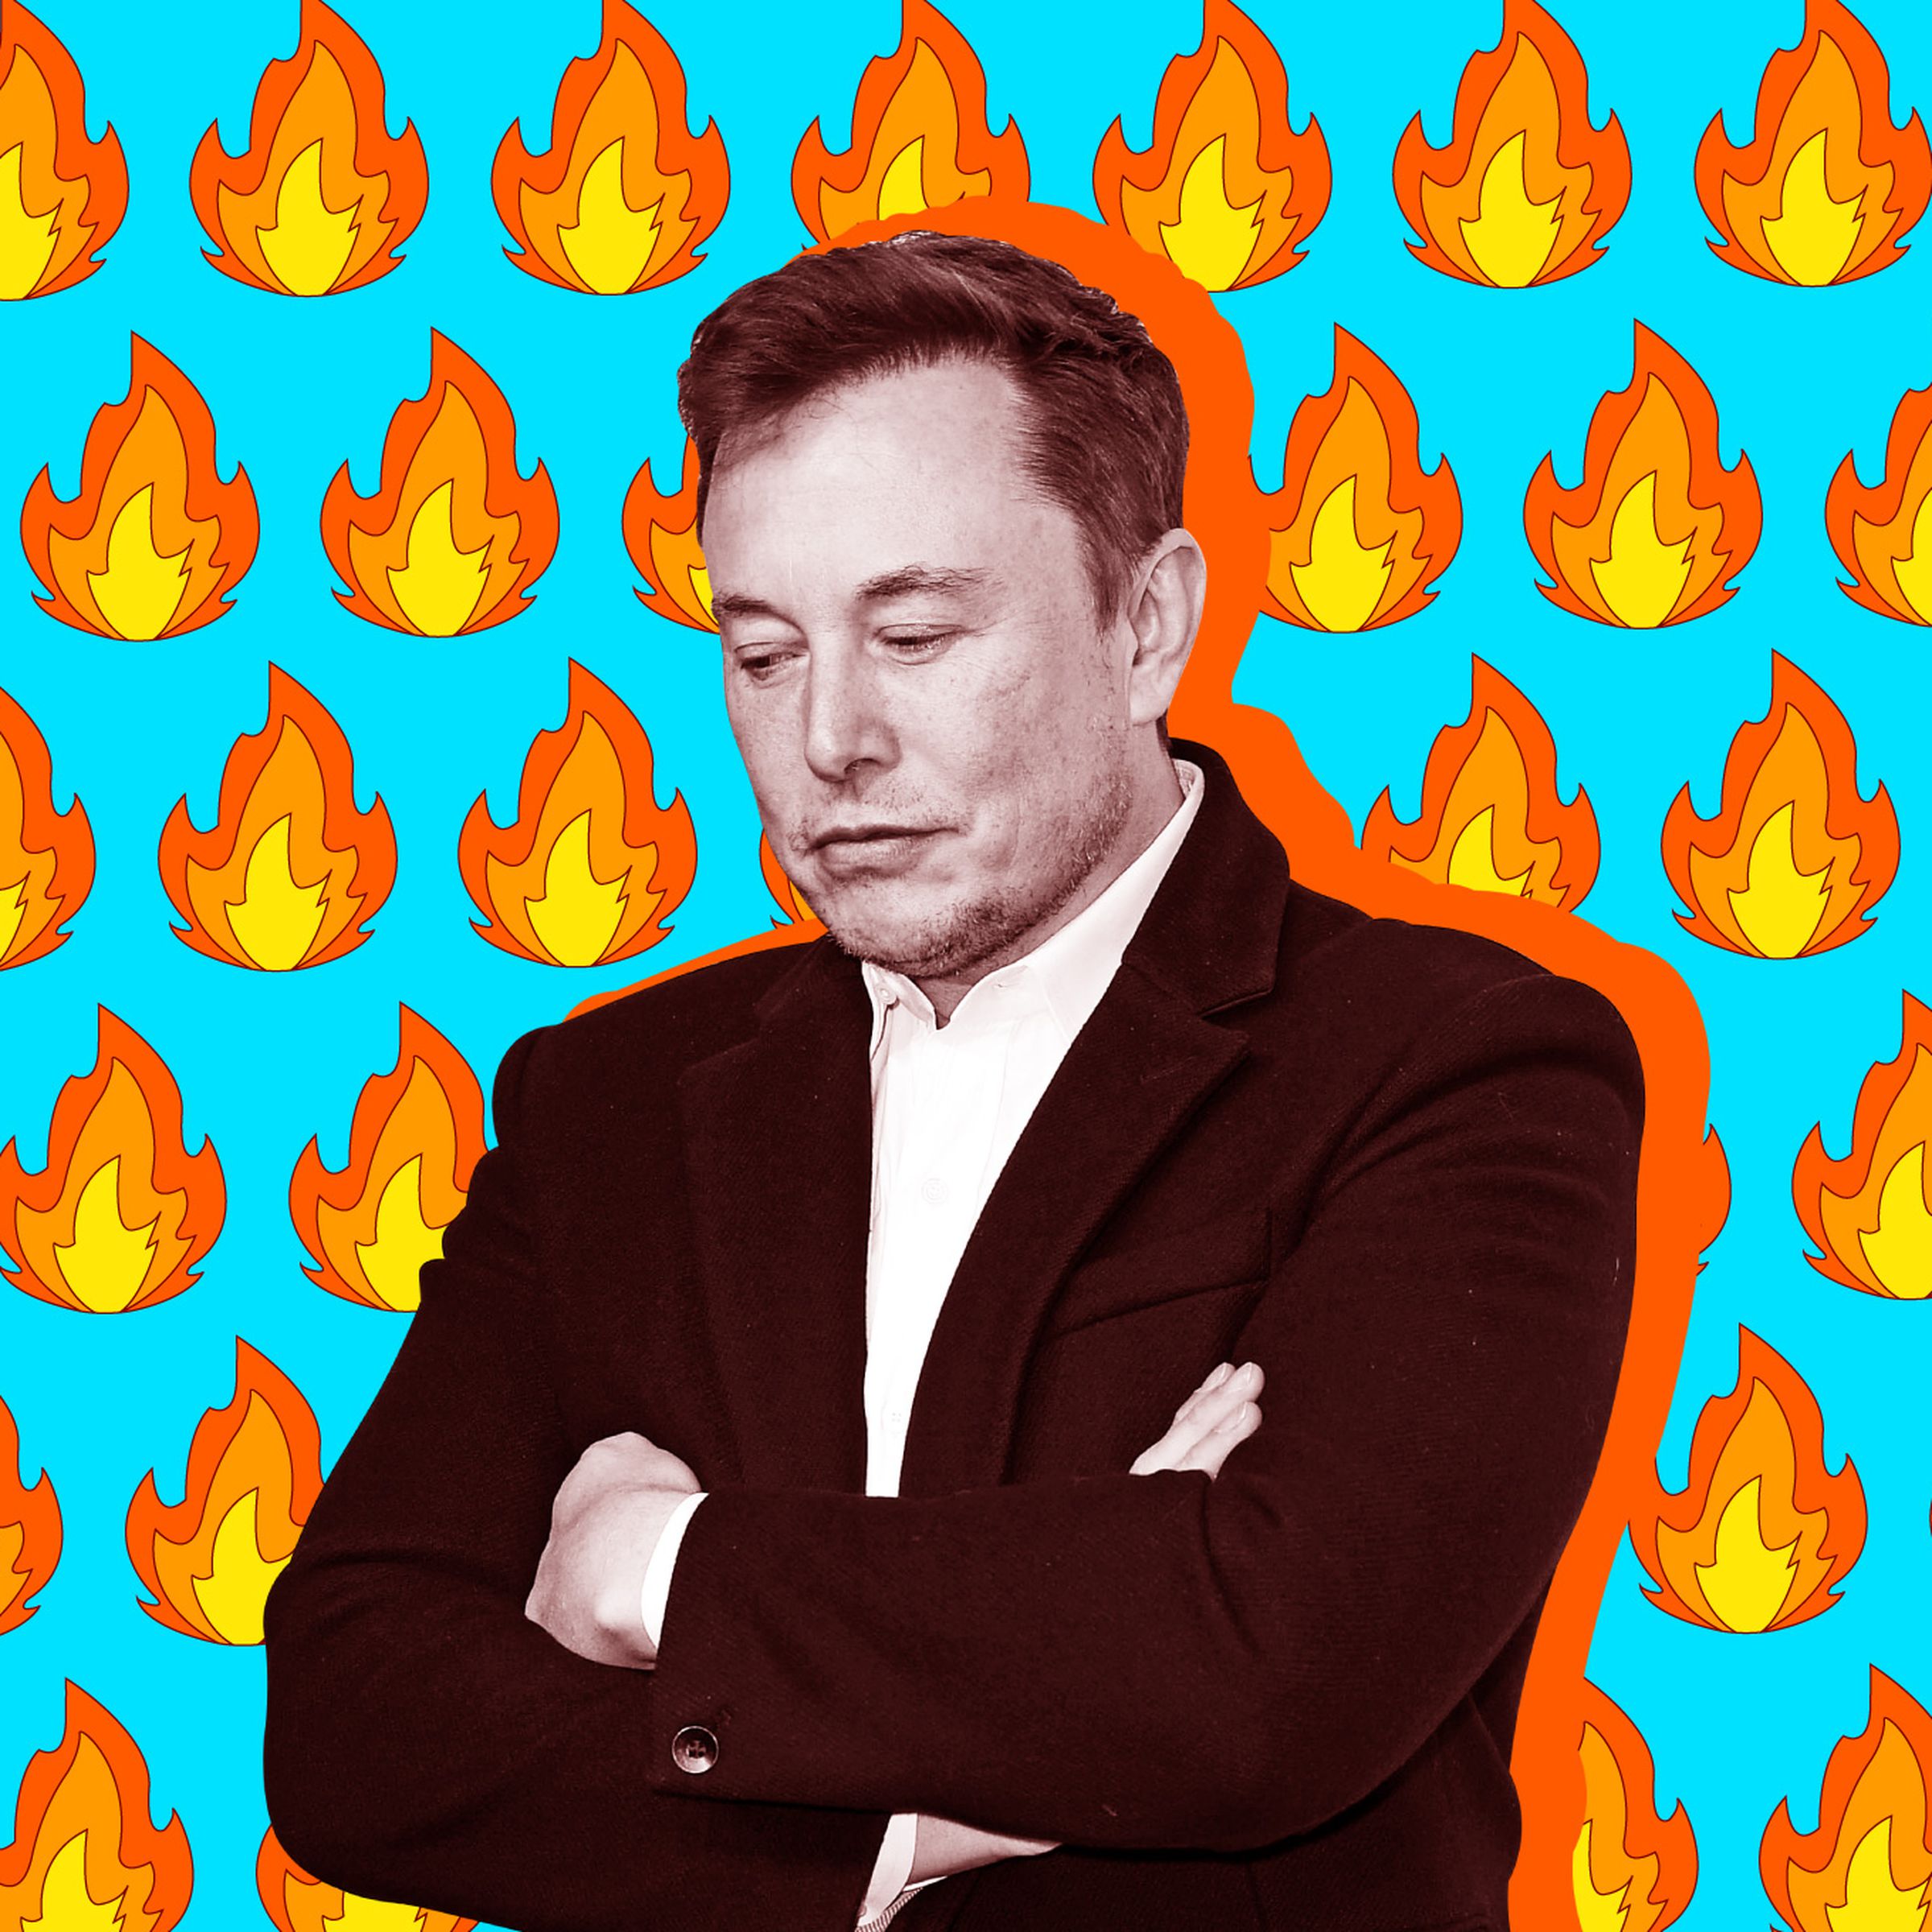 Elon Musk stands, frowning, in front of flame emoji